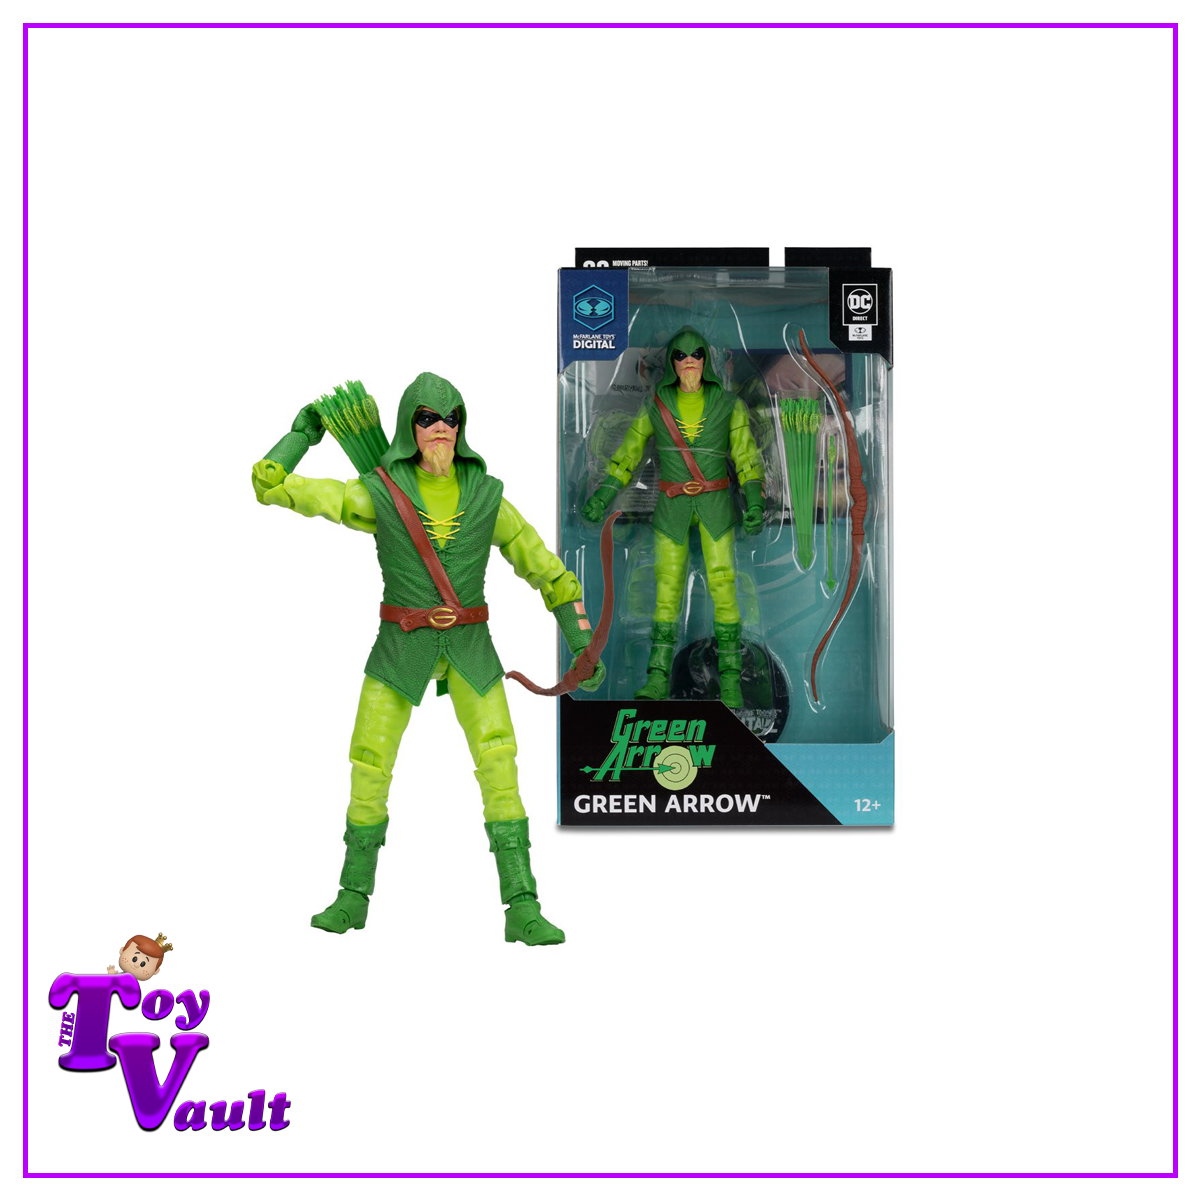 McFarlane Toys DC Direct DC Heroes Justice League Green Arrow Classic 7-Inch Scale Wave 2 Action Figure with McFarlane Toys Digital Collectible Preorder